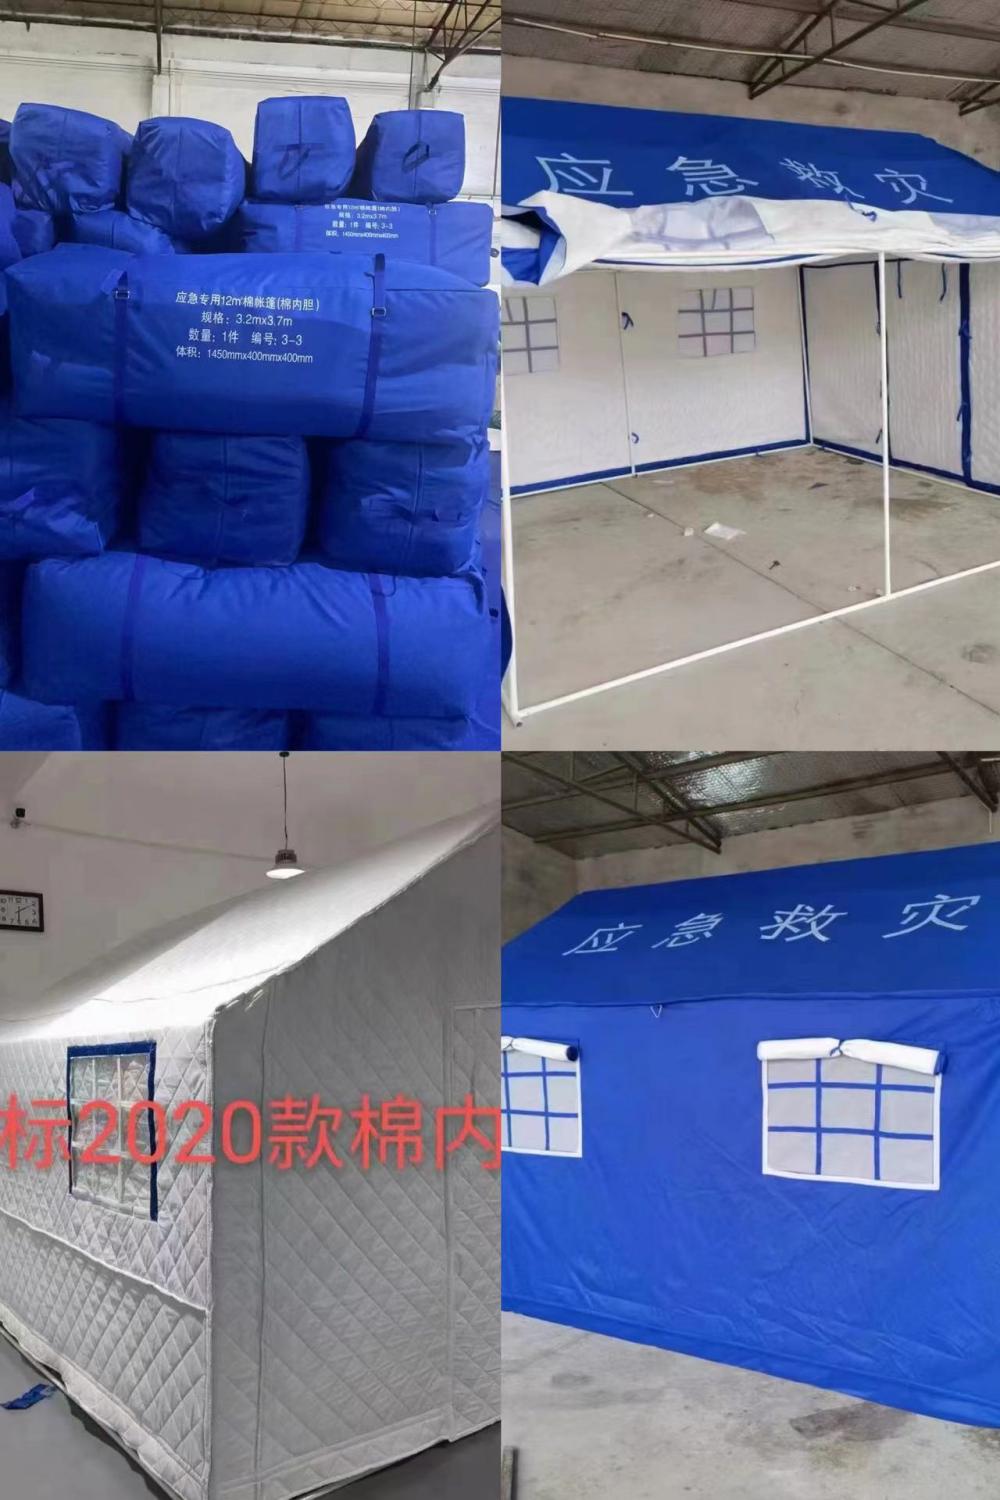 Emergency medical epidemic prevention and fire tent